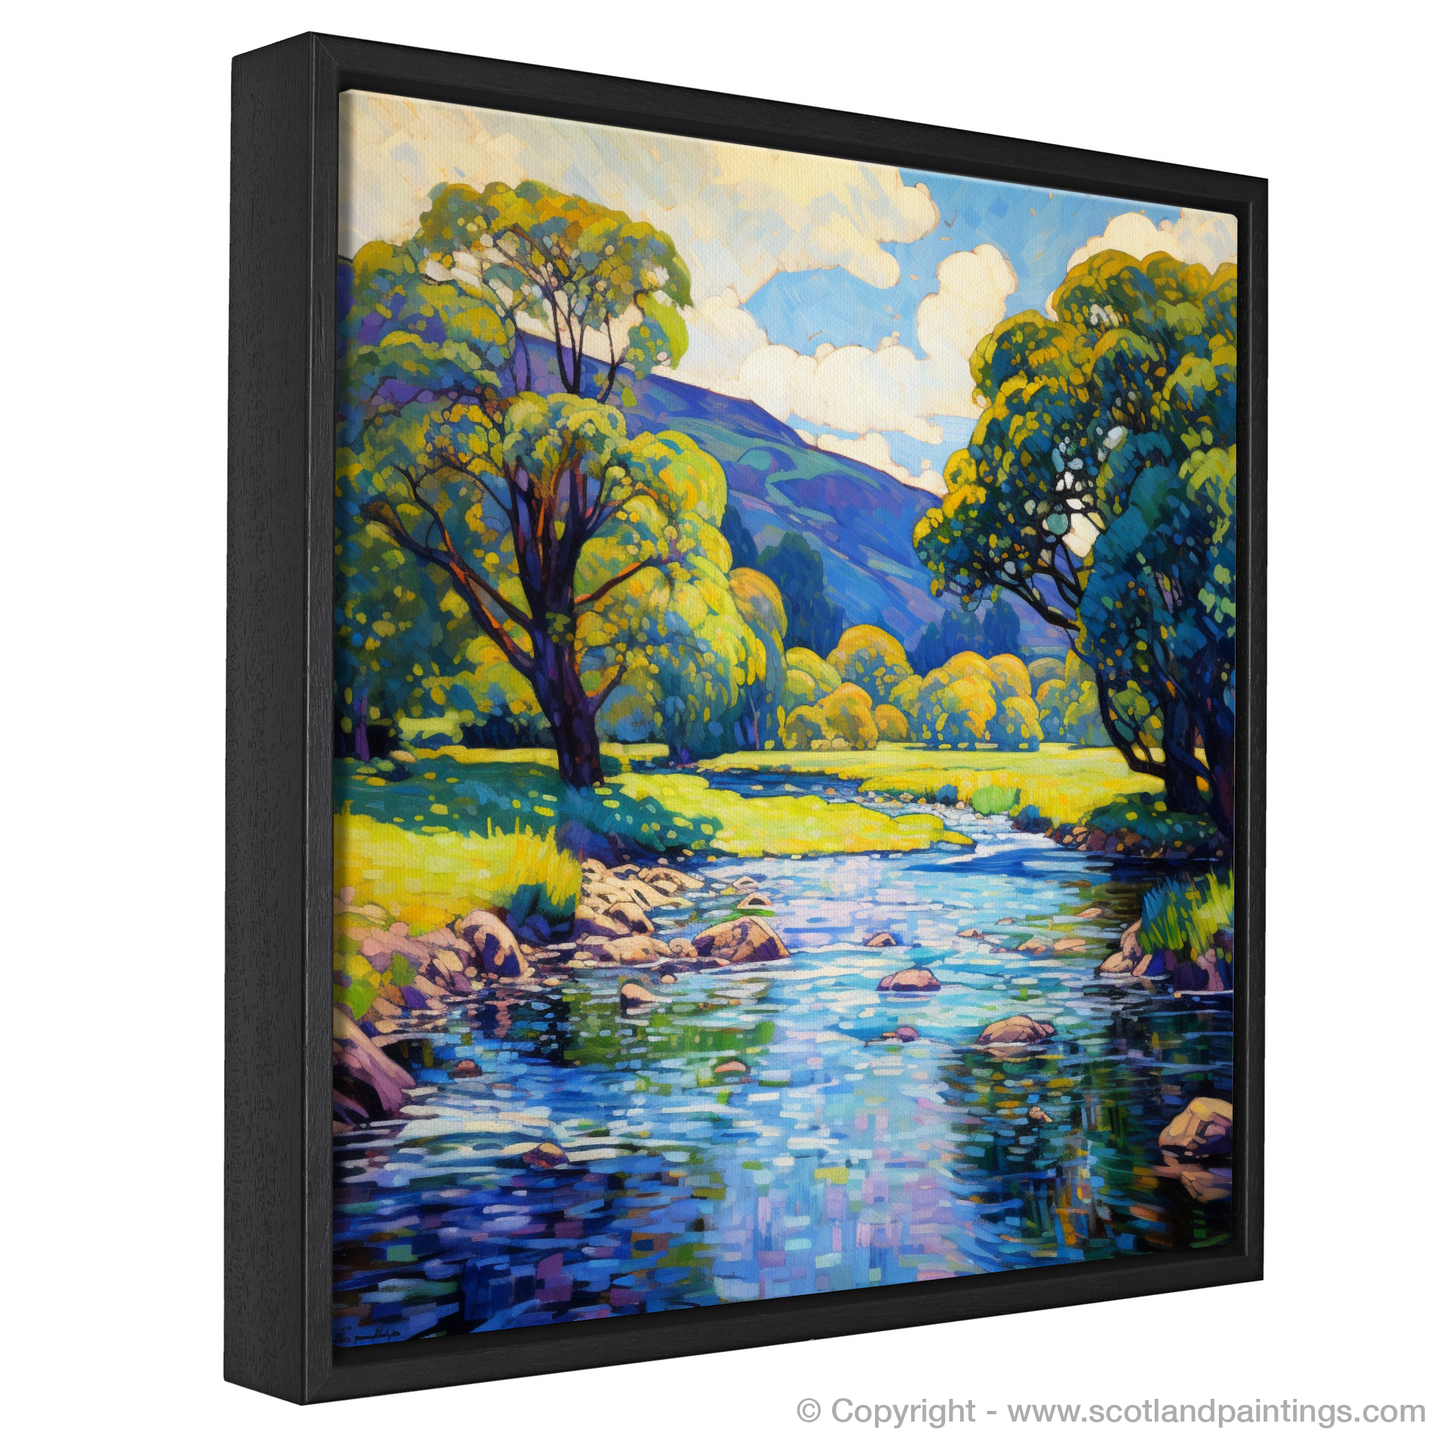 Painting and Art Print of River Earn, Perthshire in summer entitled "Summer Serenity on River Earn, Perthshire".